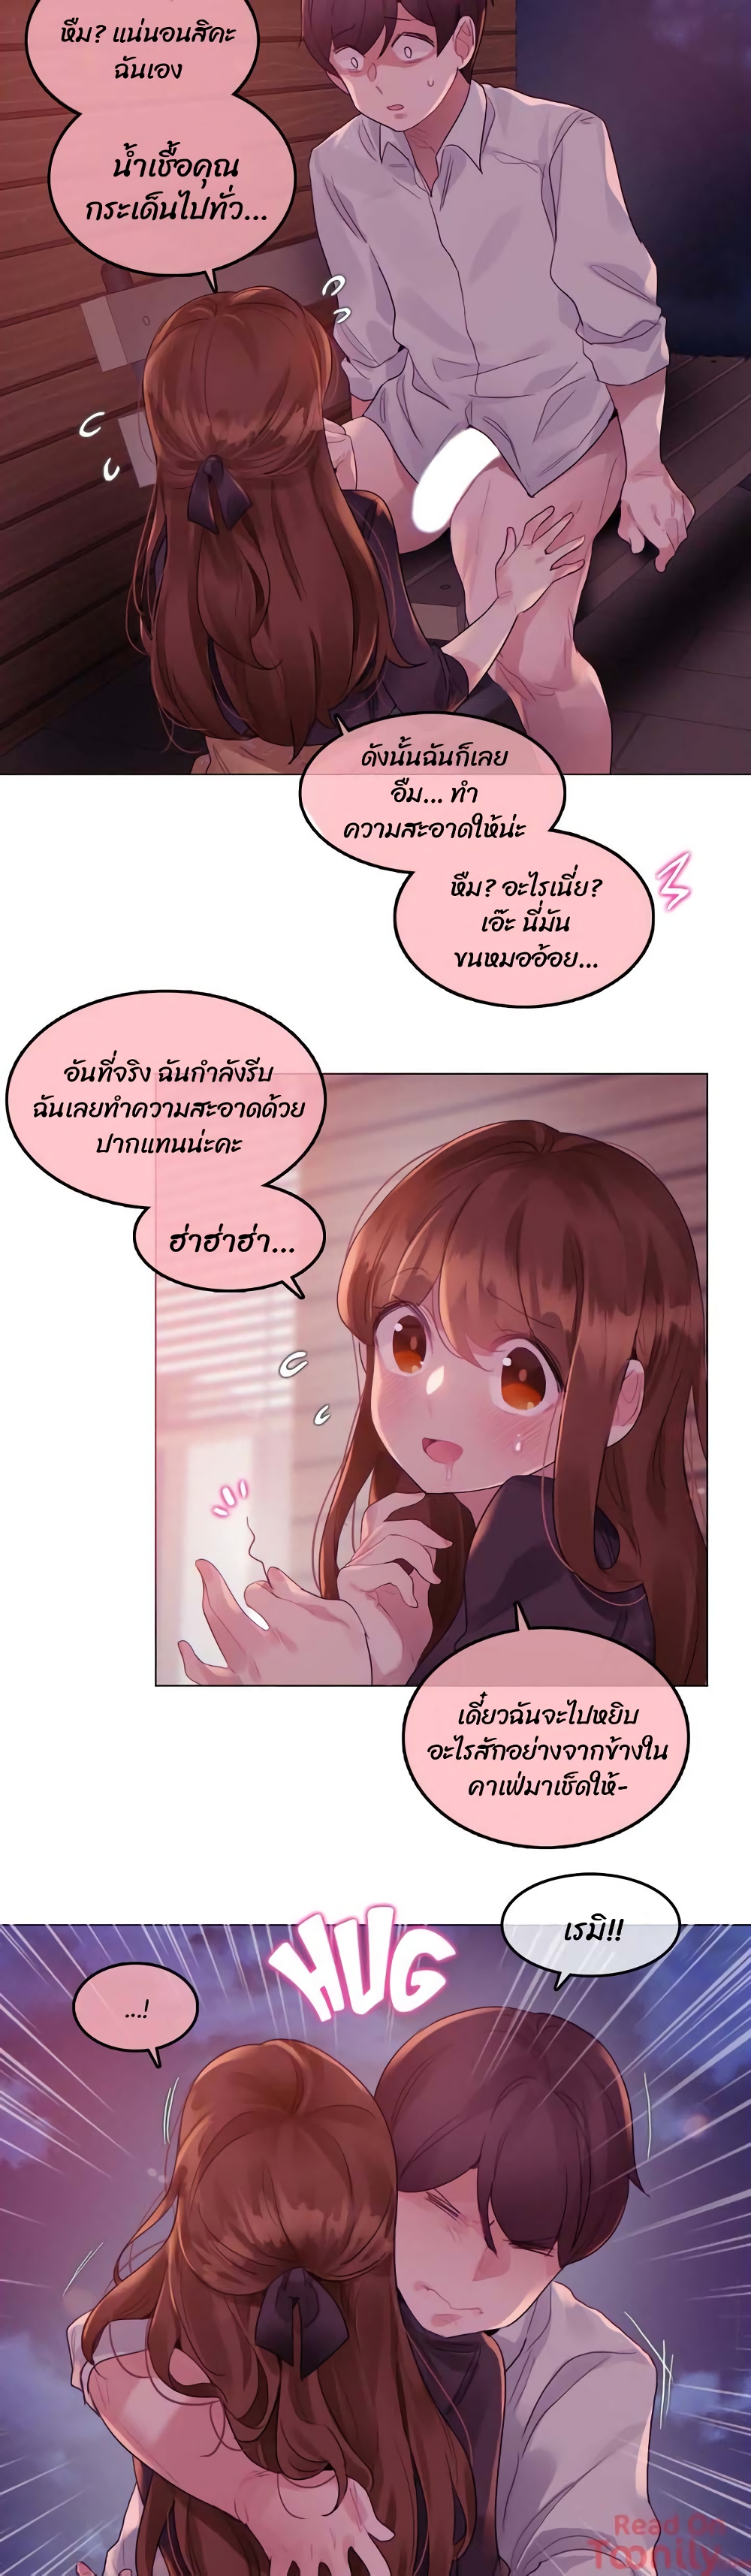 A Pervert's Daily Life 90 (5)